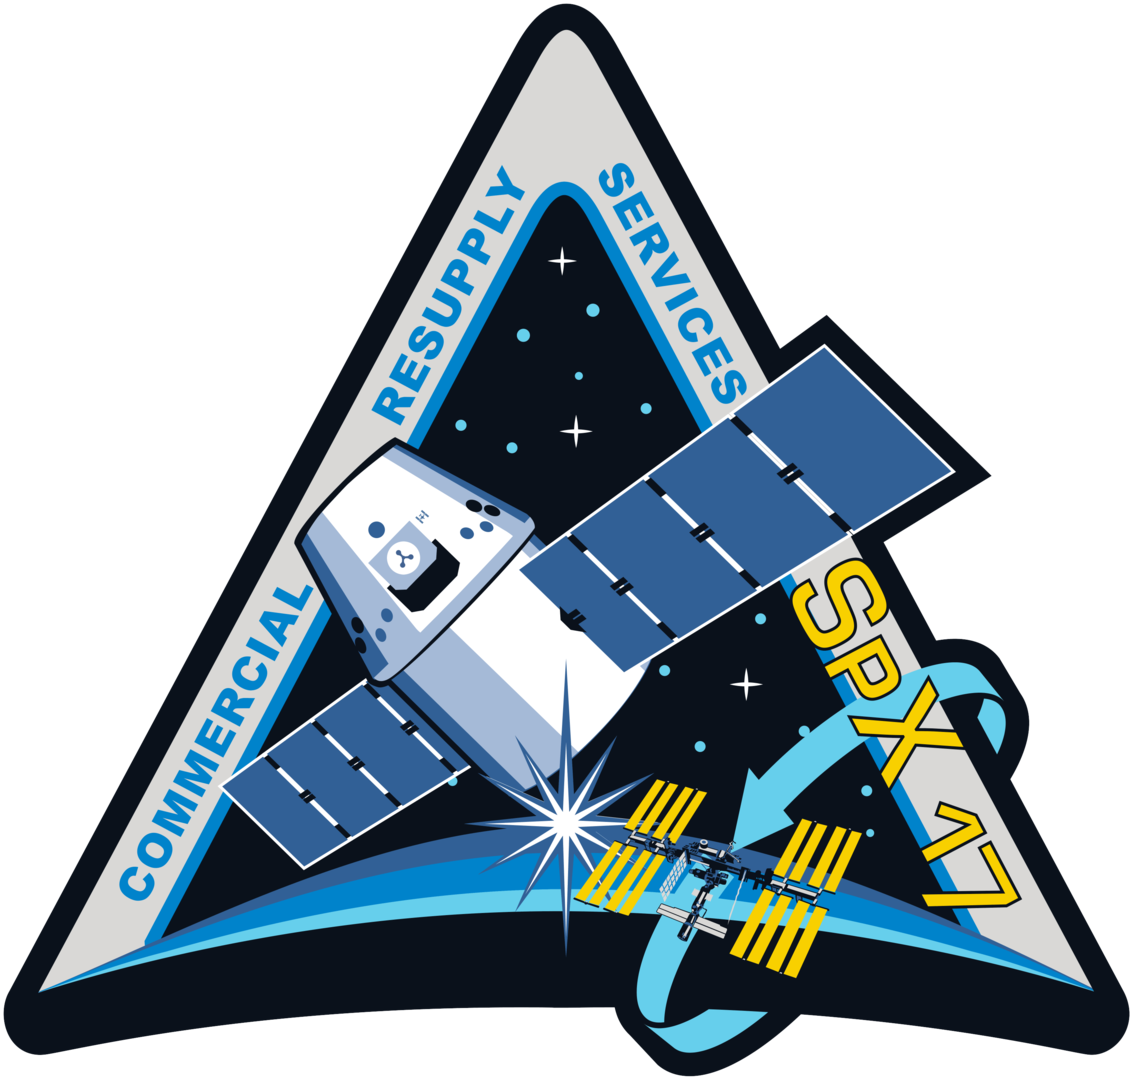 Mission patch for SpX CRS-17